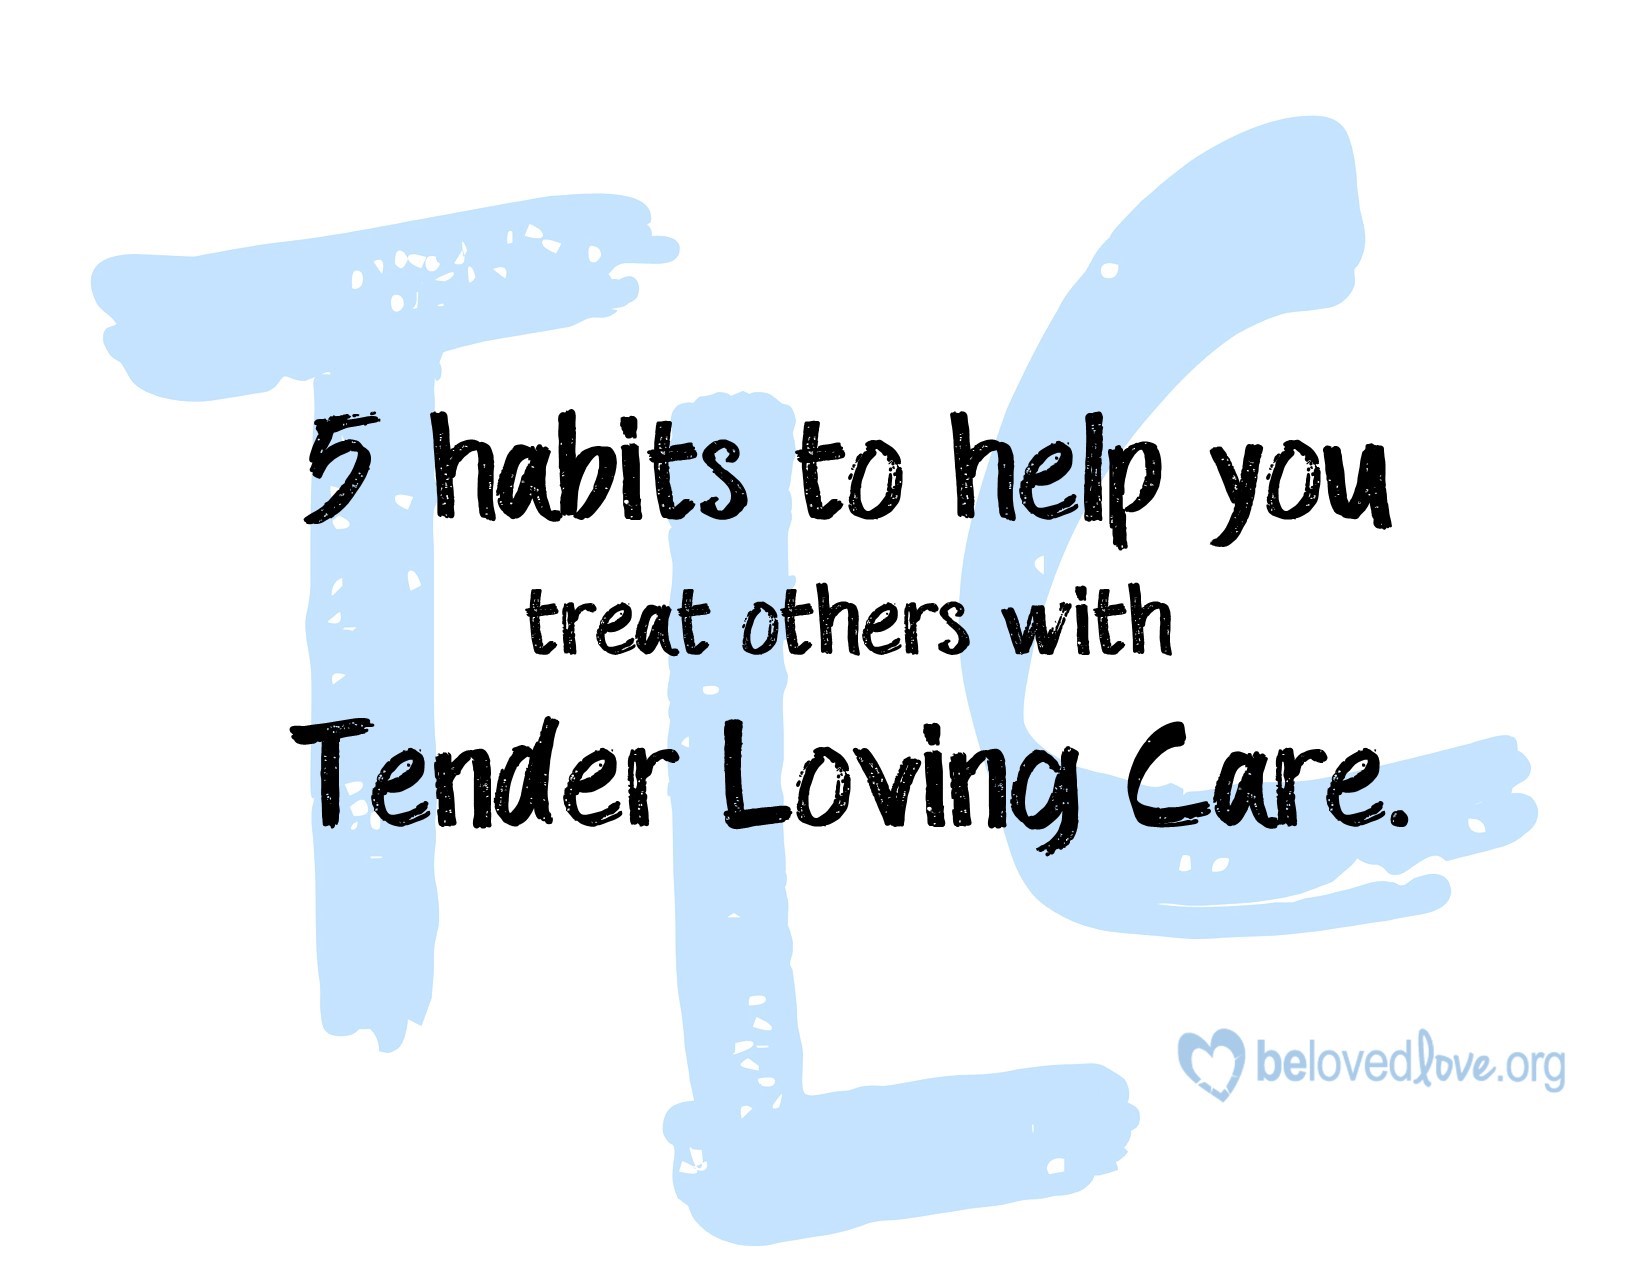 5 habits to help you treat others with tender loving care